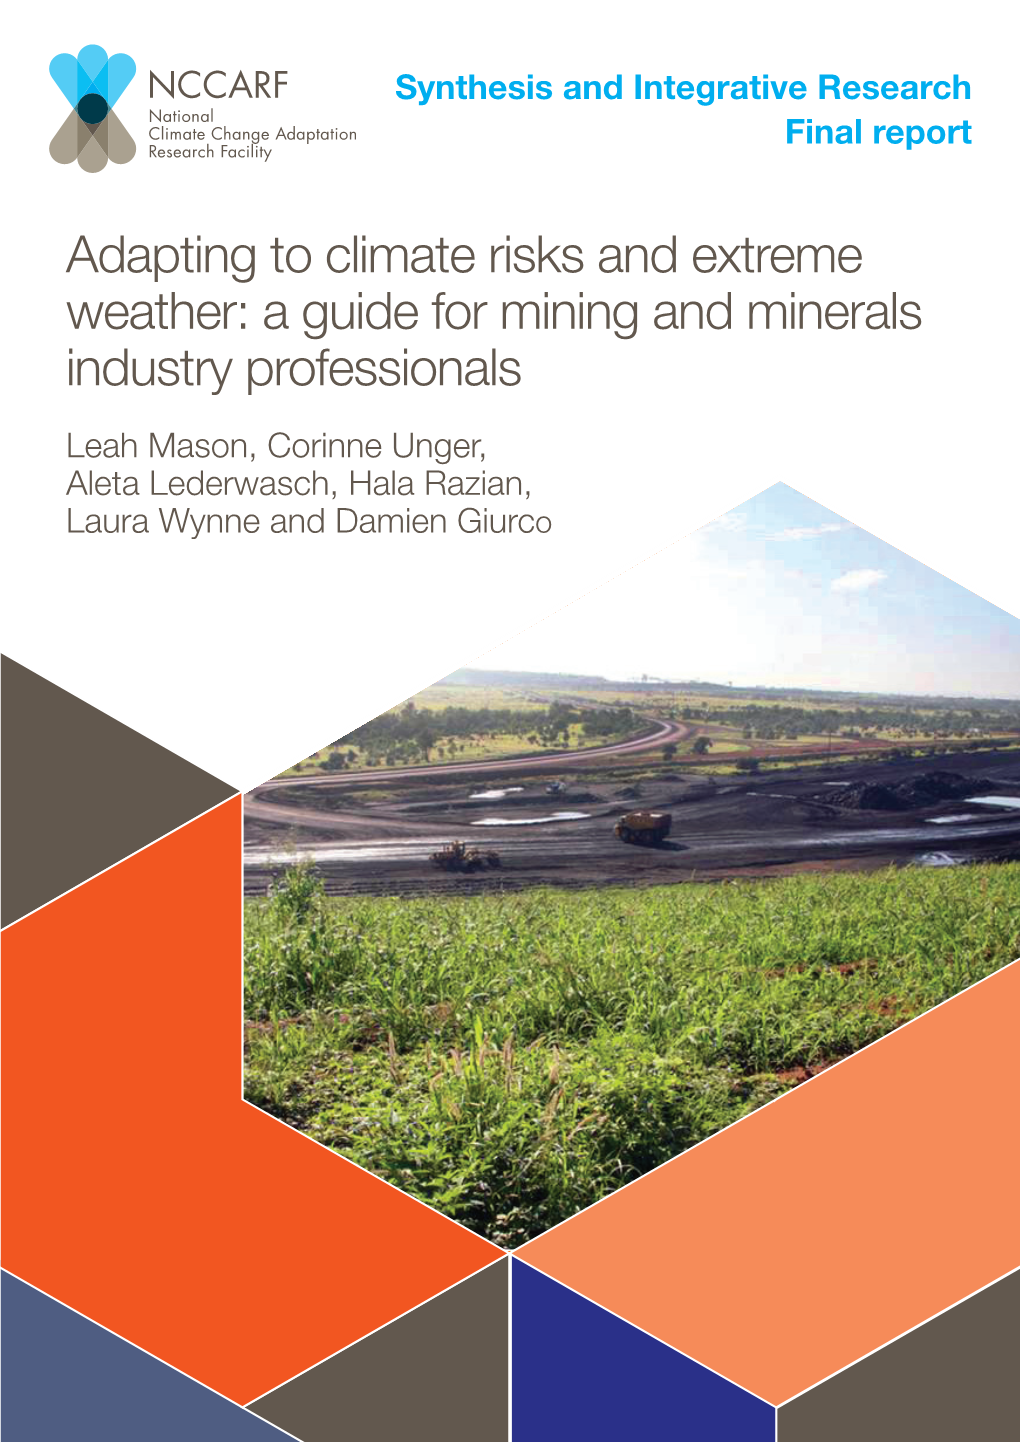 Adapting to Climate Risks and Extreme Weather: a Guide for Mining and Minerals Industry Professionals